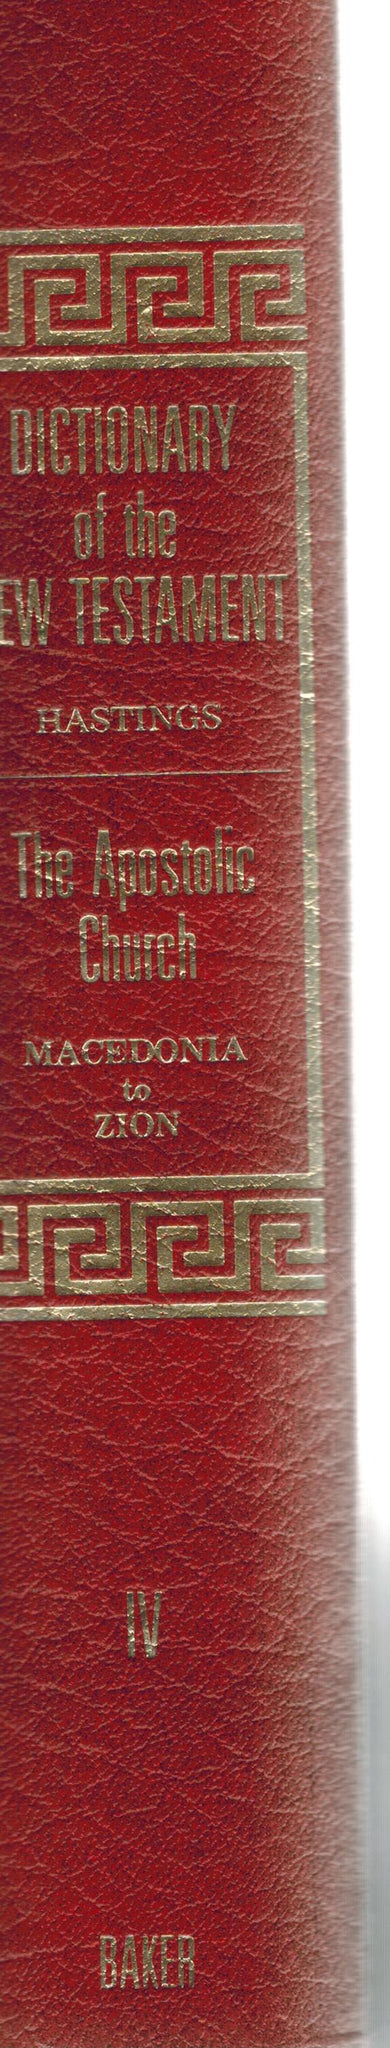 DICTIONARY OF THE APOSTOLIC CHURCH VOLUME II MACEDONIA - ZION WITH INDEXES (DICTIONARY OF THE NEW TESTAMENT IV) 